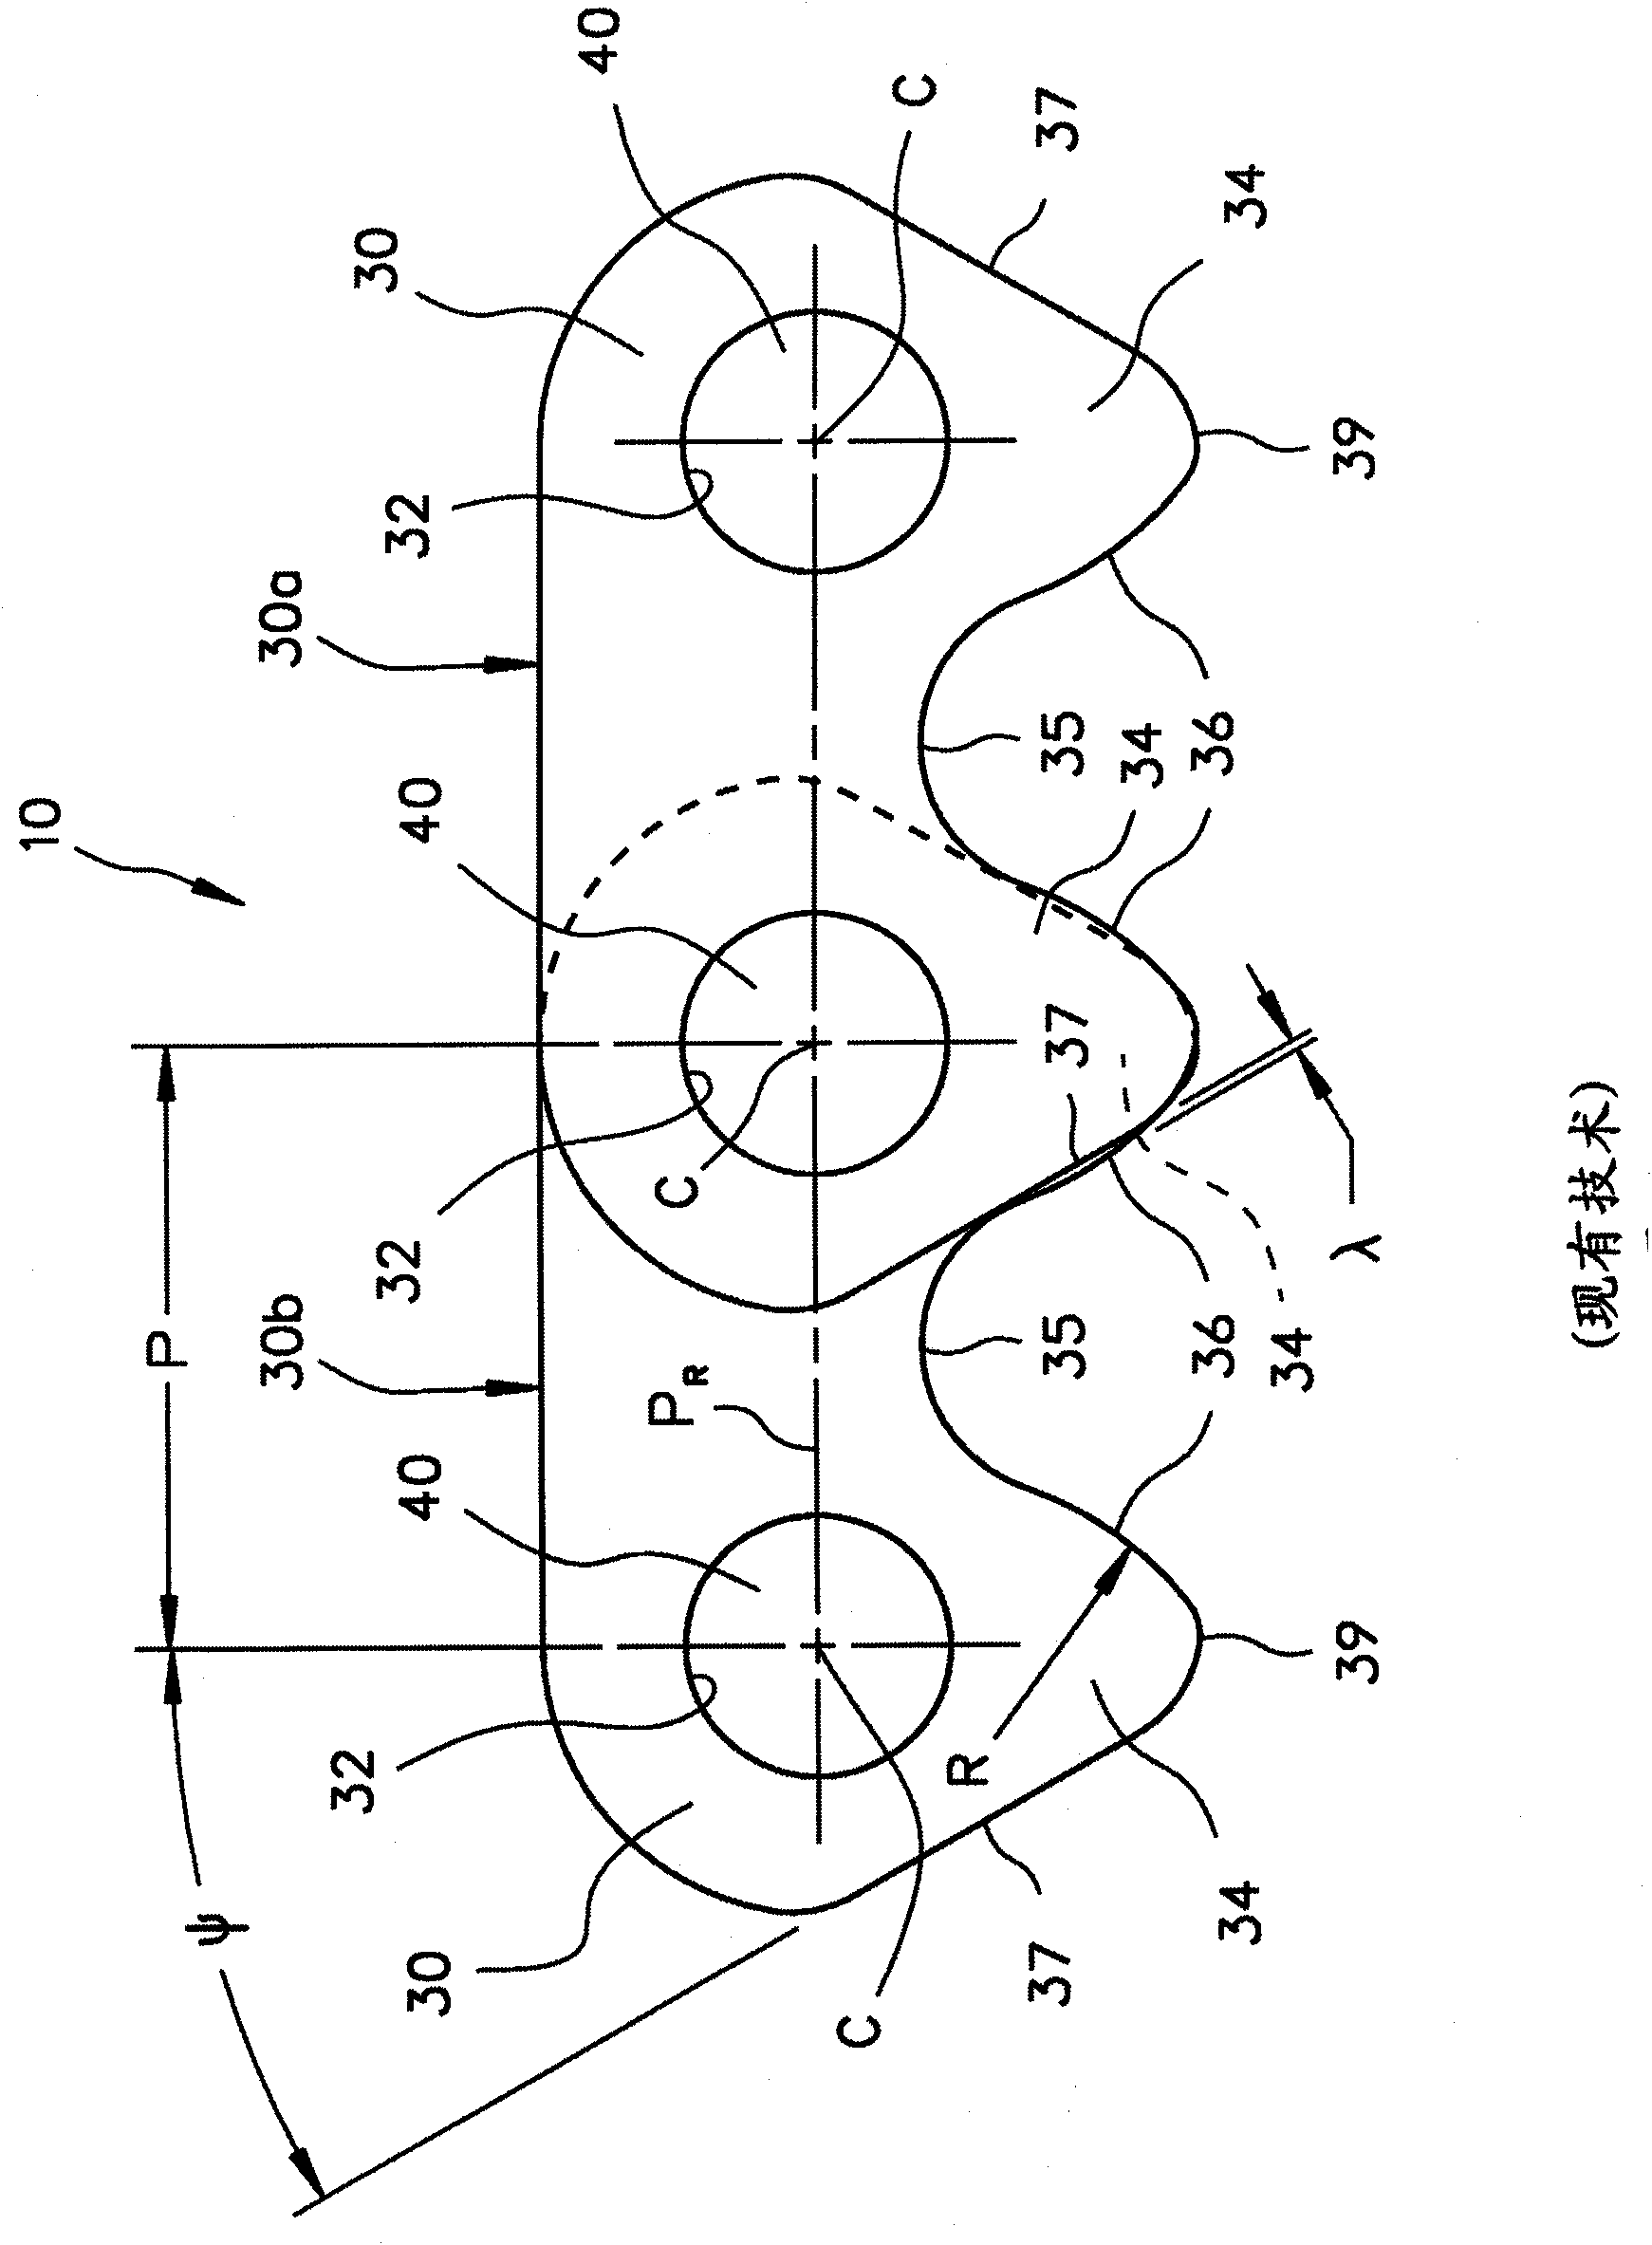 Inverted tooth chain sprocket drive system with reduced meshing impact